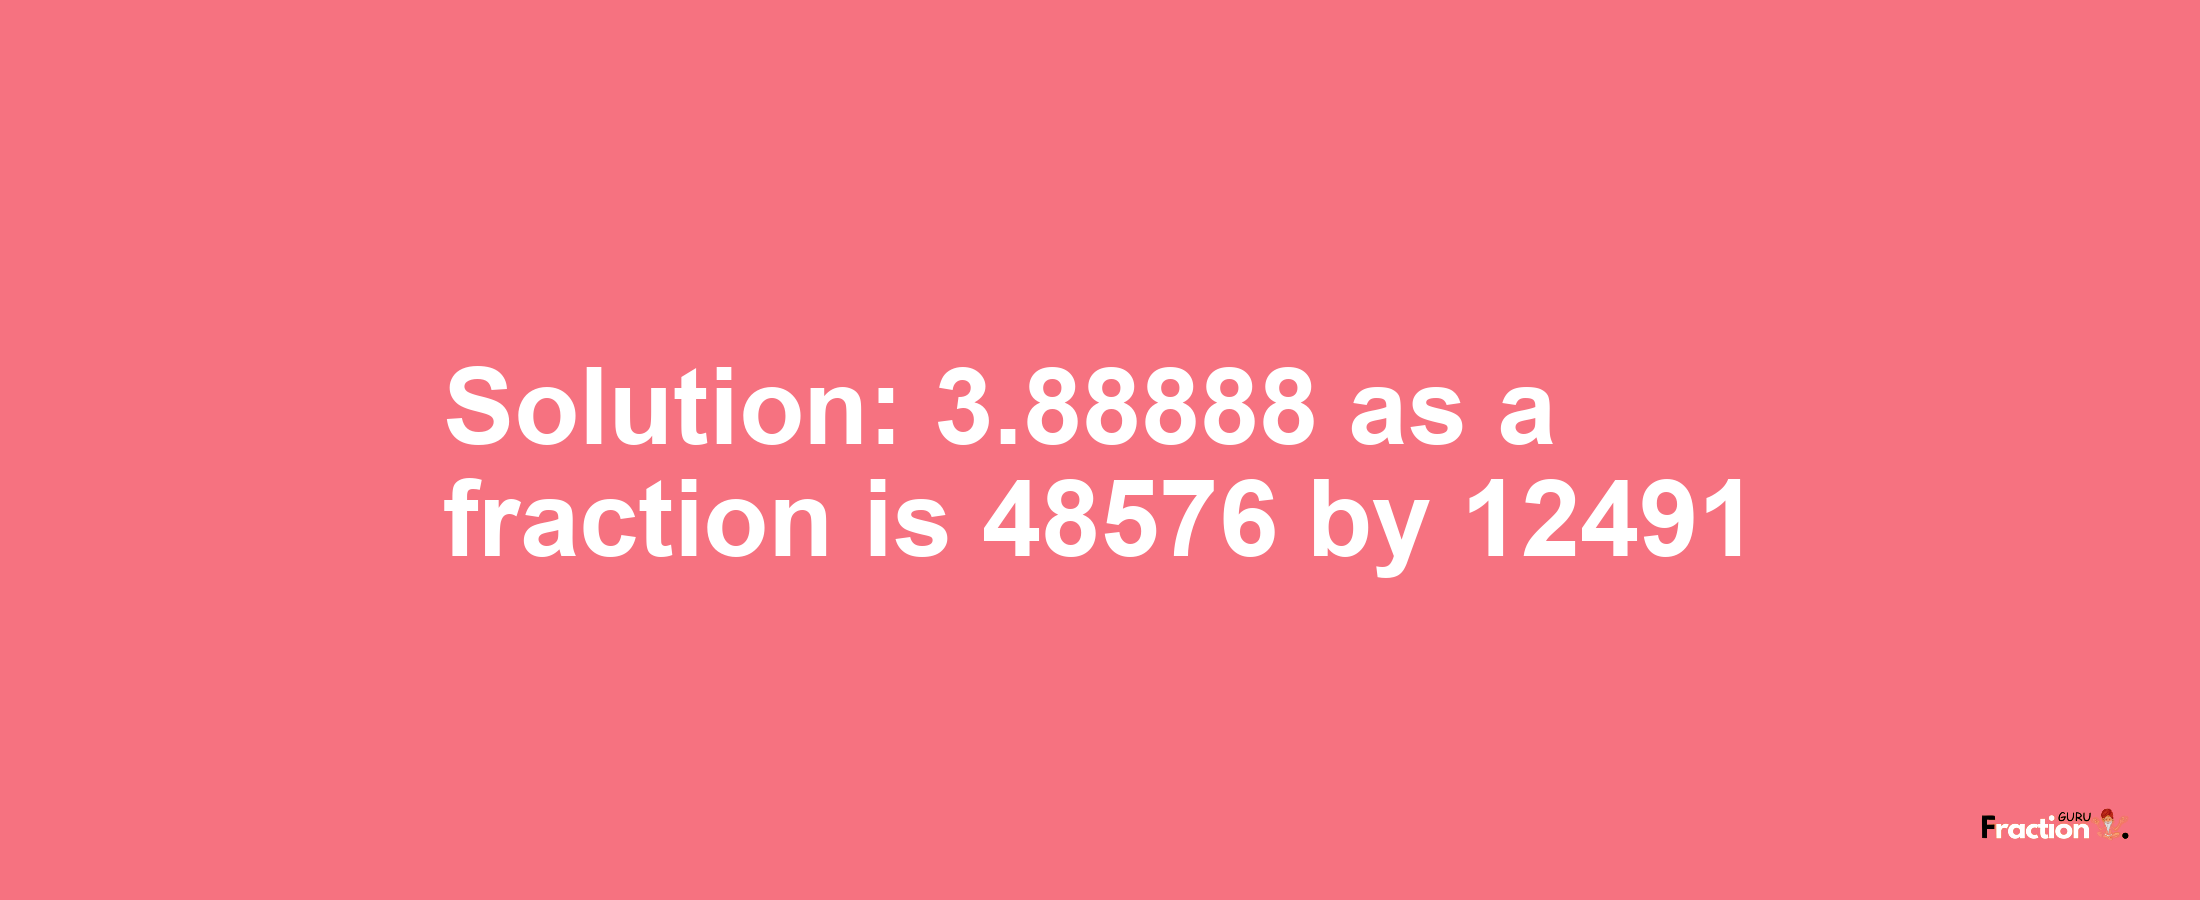 Solution:3.88888 as a fraction is 48576/12491